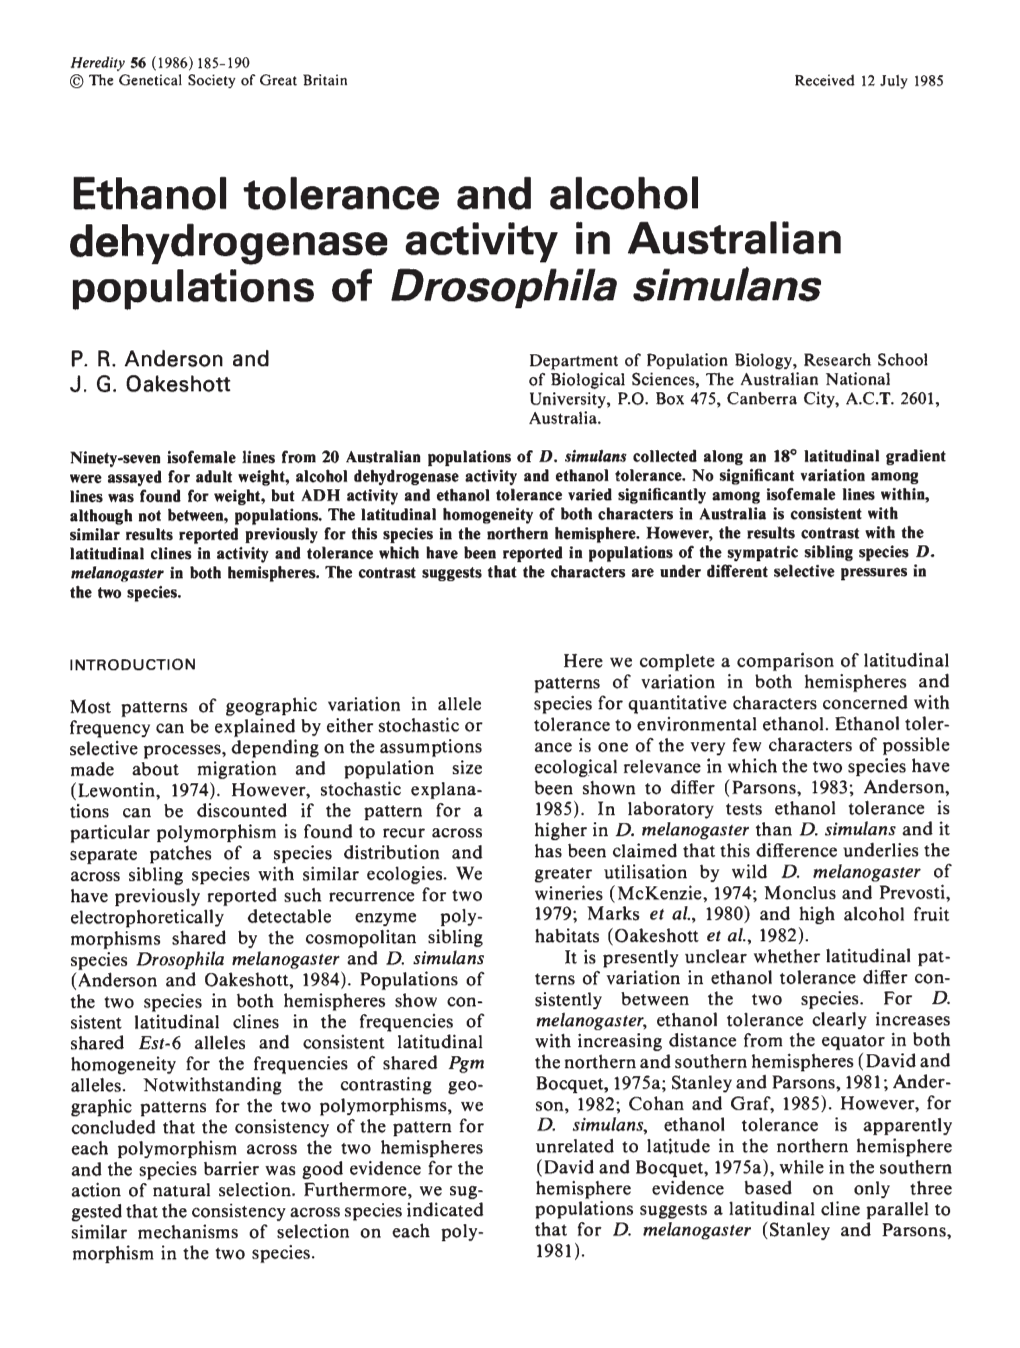 Ethanol Tolerance and Alcohol Dehydrogenase Activity In